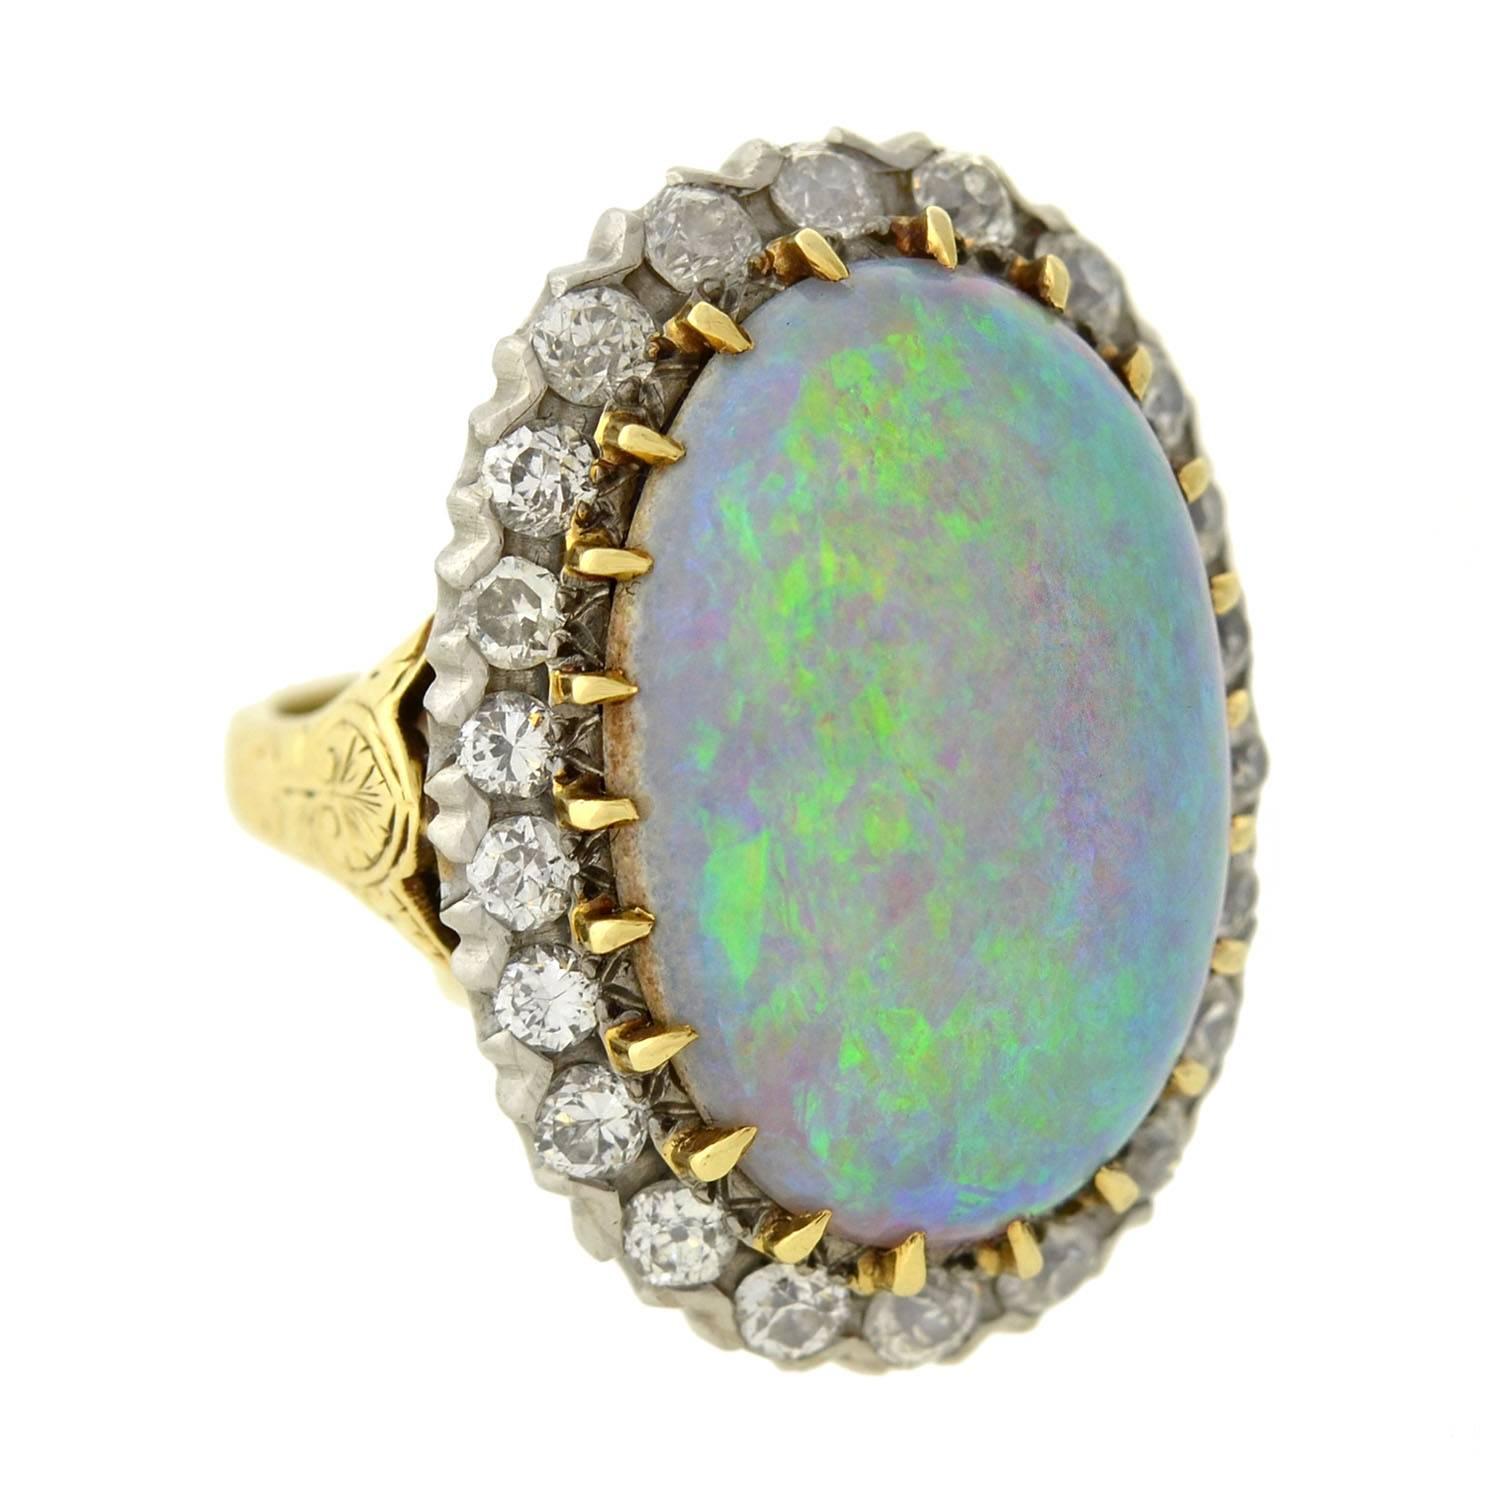 Exquisite Victorian Large Opal Diamond Gold & Sterling Ring